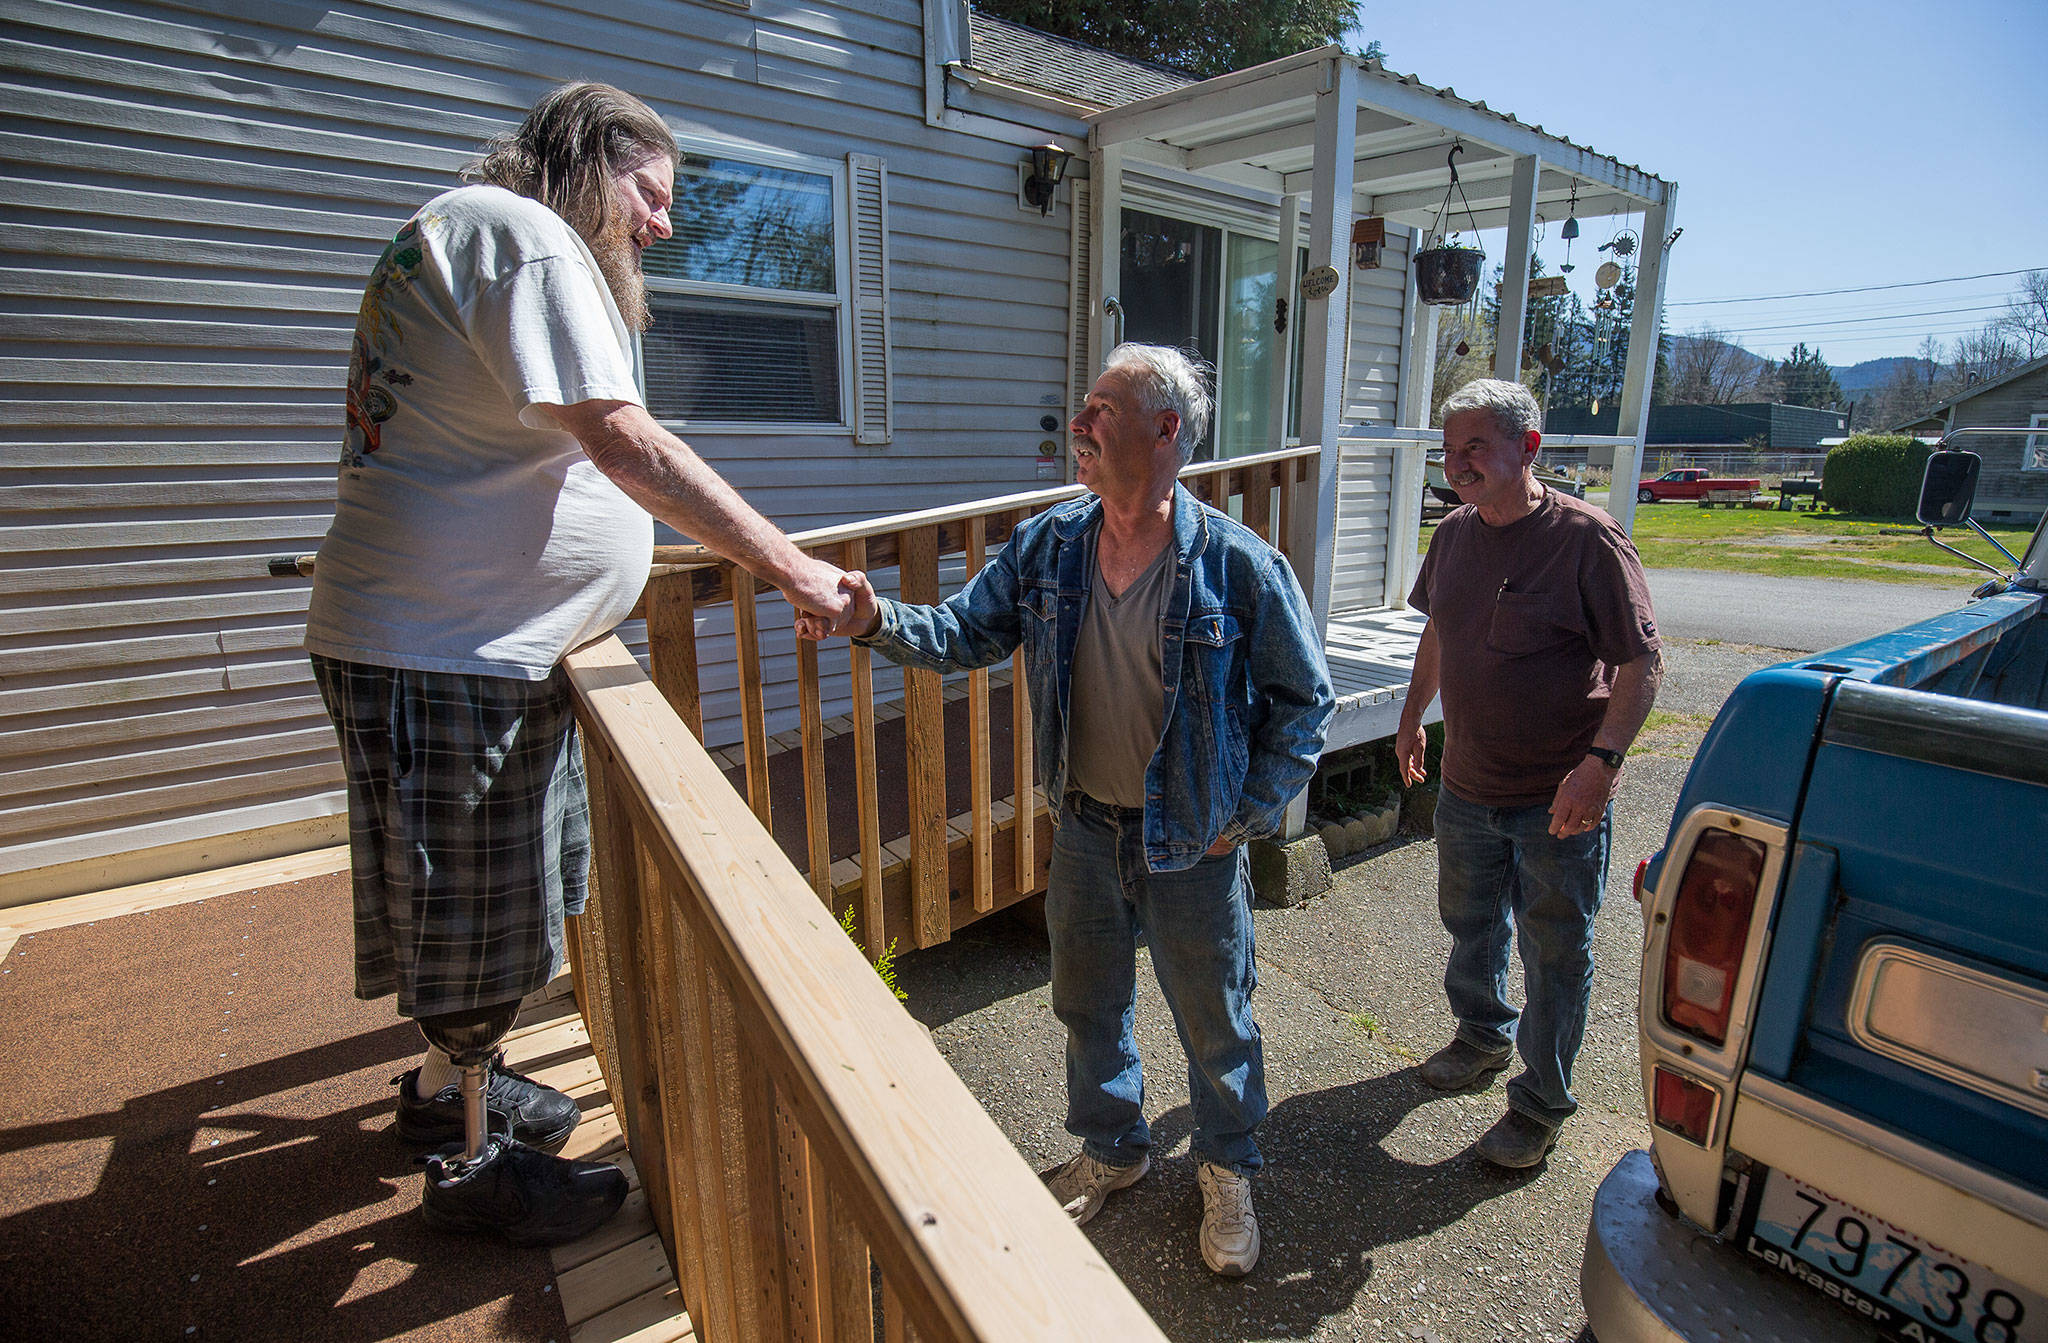 Standing on a new ramp to his home, Doug Waddell shakes hands with Dennis Taylor and Dan Barmon on April 15 in Sultan. Taylor and Barmon built the ramp for Waddell in exchange for two apple pies cooked up by Waddell’s mom and a friend. (Andy Bronson / The Herald)